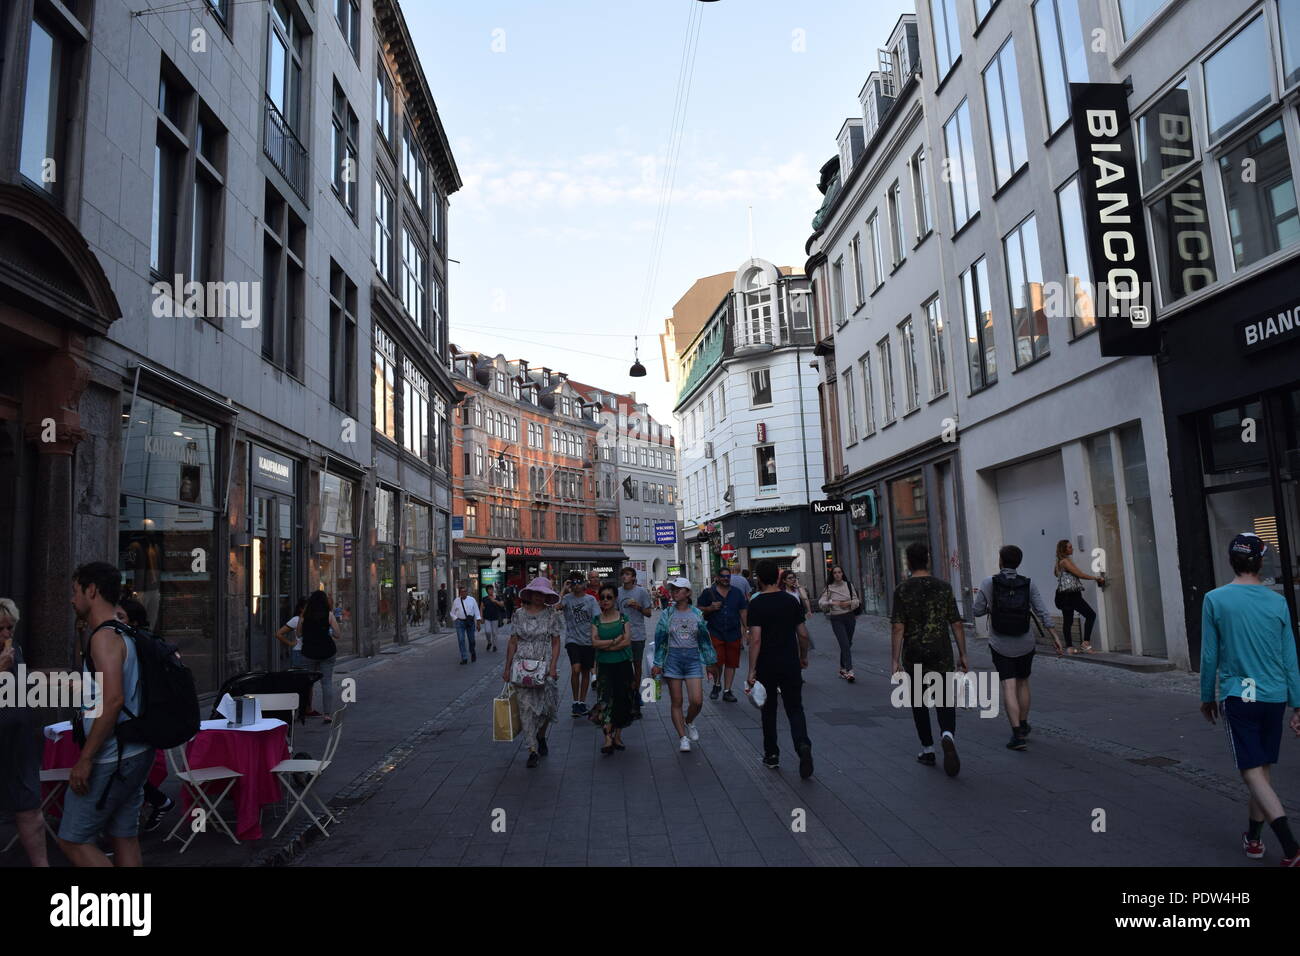 Walking Street Resolution Stock Photography Images - Alamy